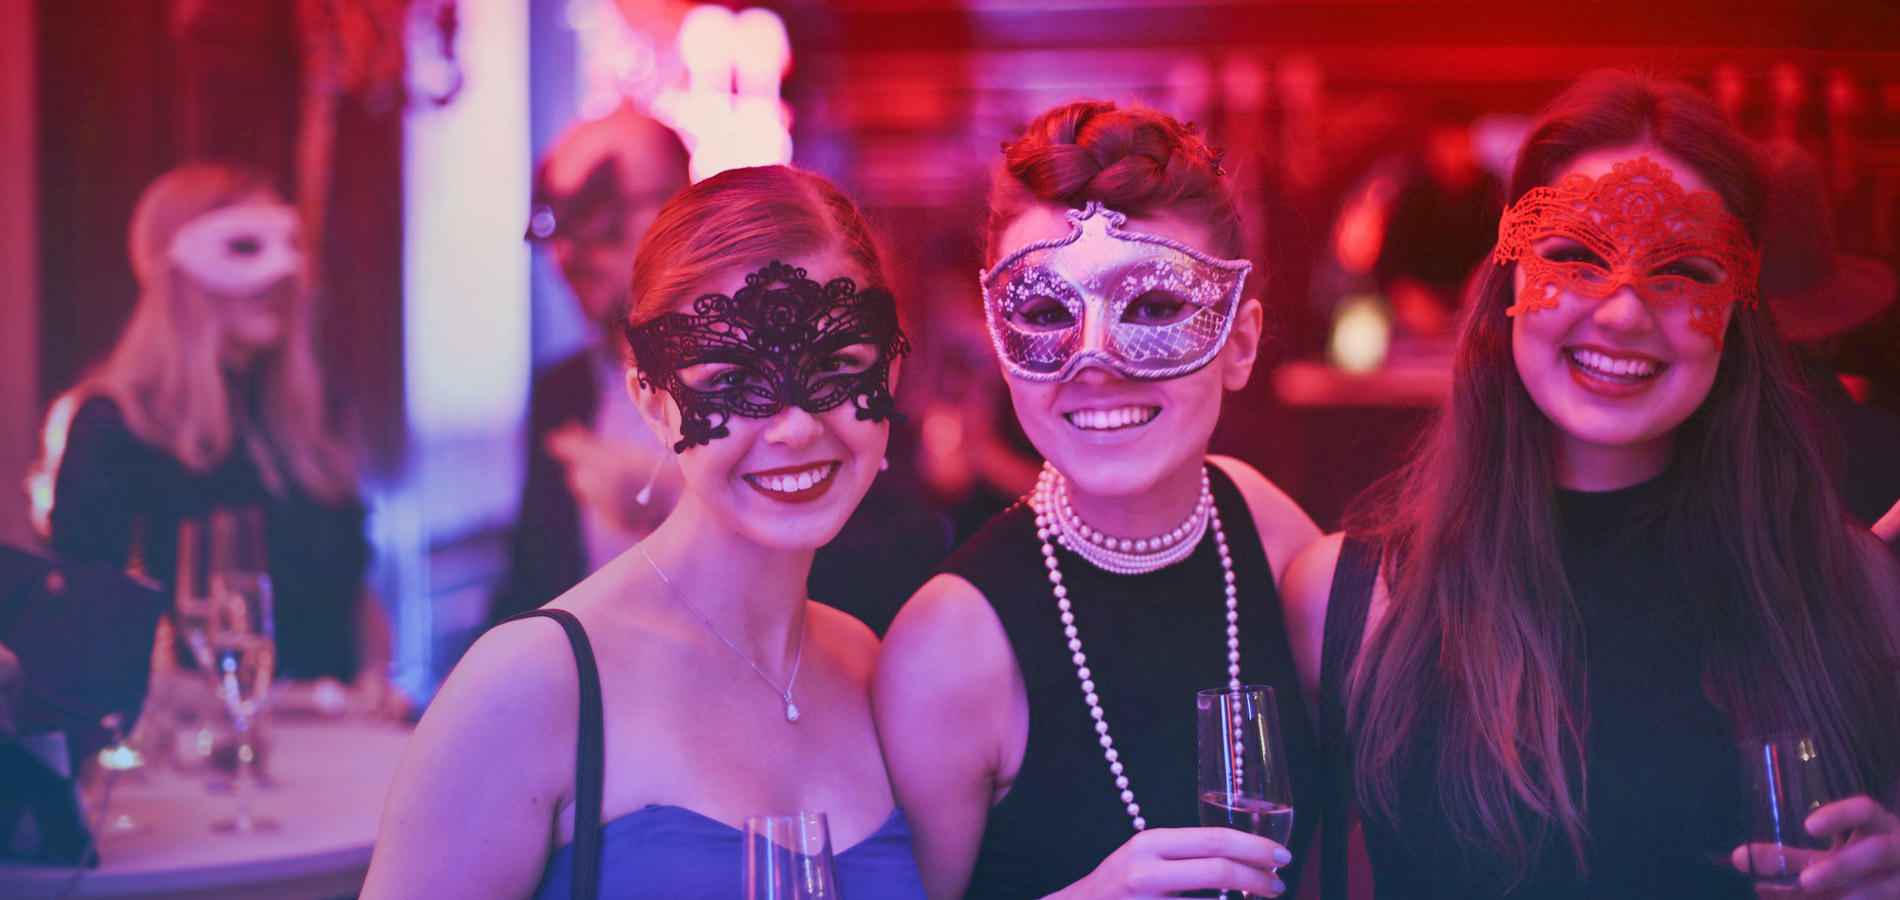 Woman at Party in Masks